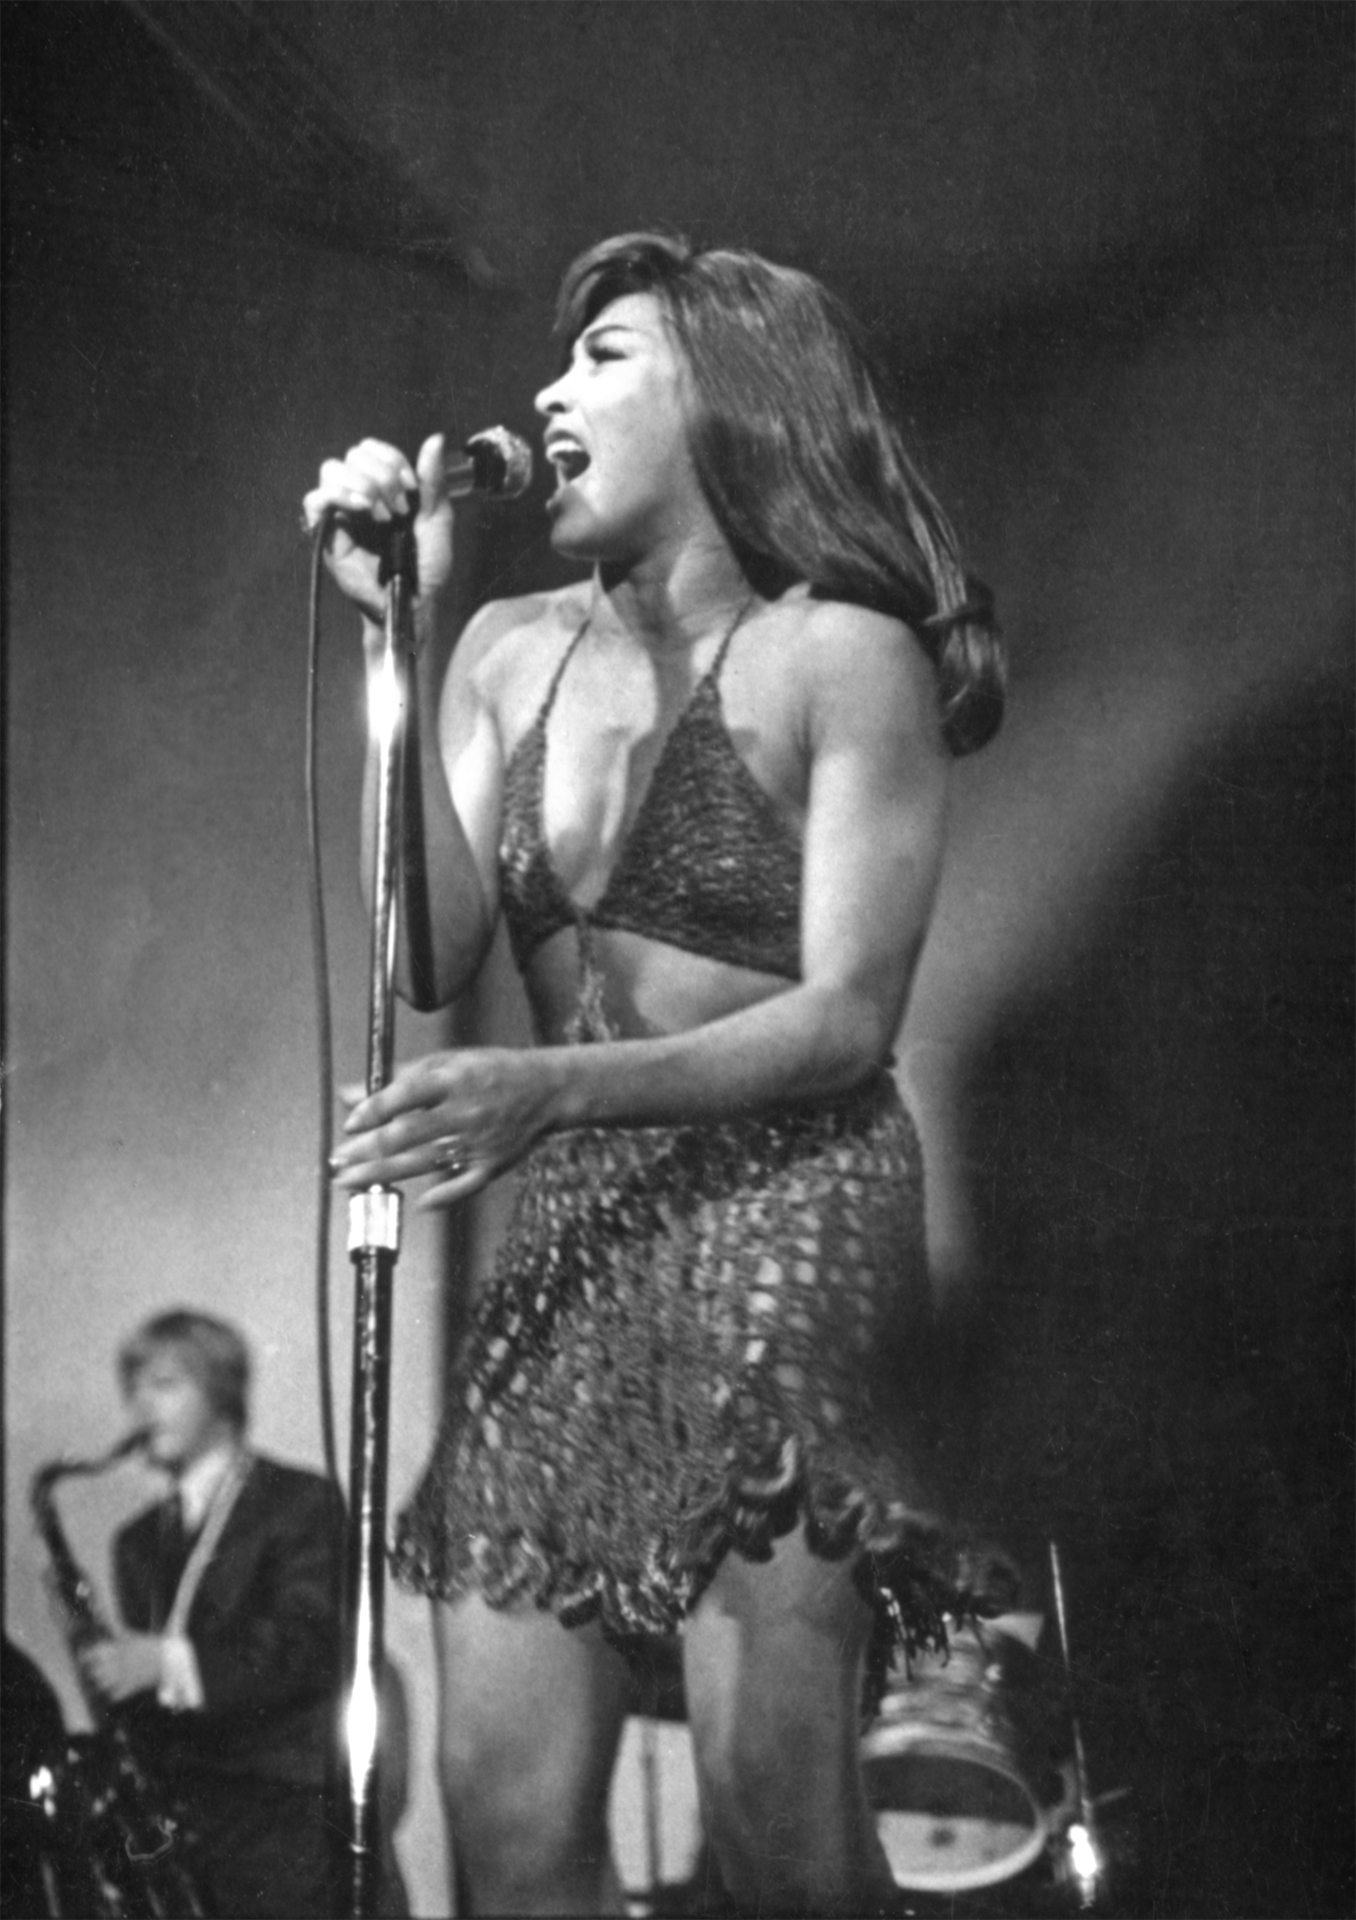 Another never-before-published shot of Tina Turner’s 1969 performance at NYC’s Electric Circus.